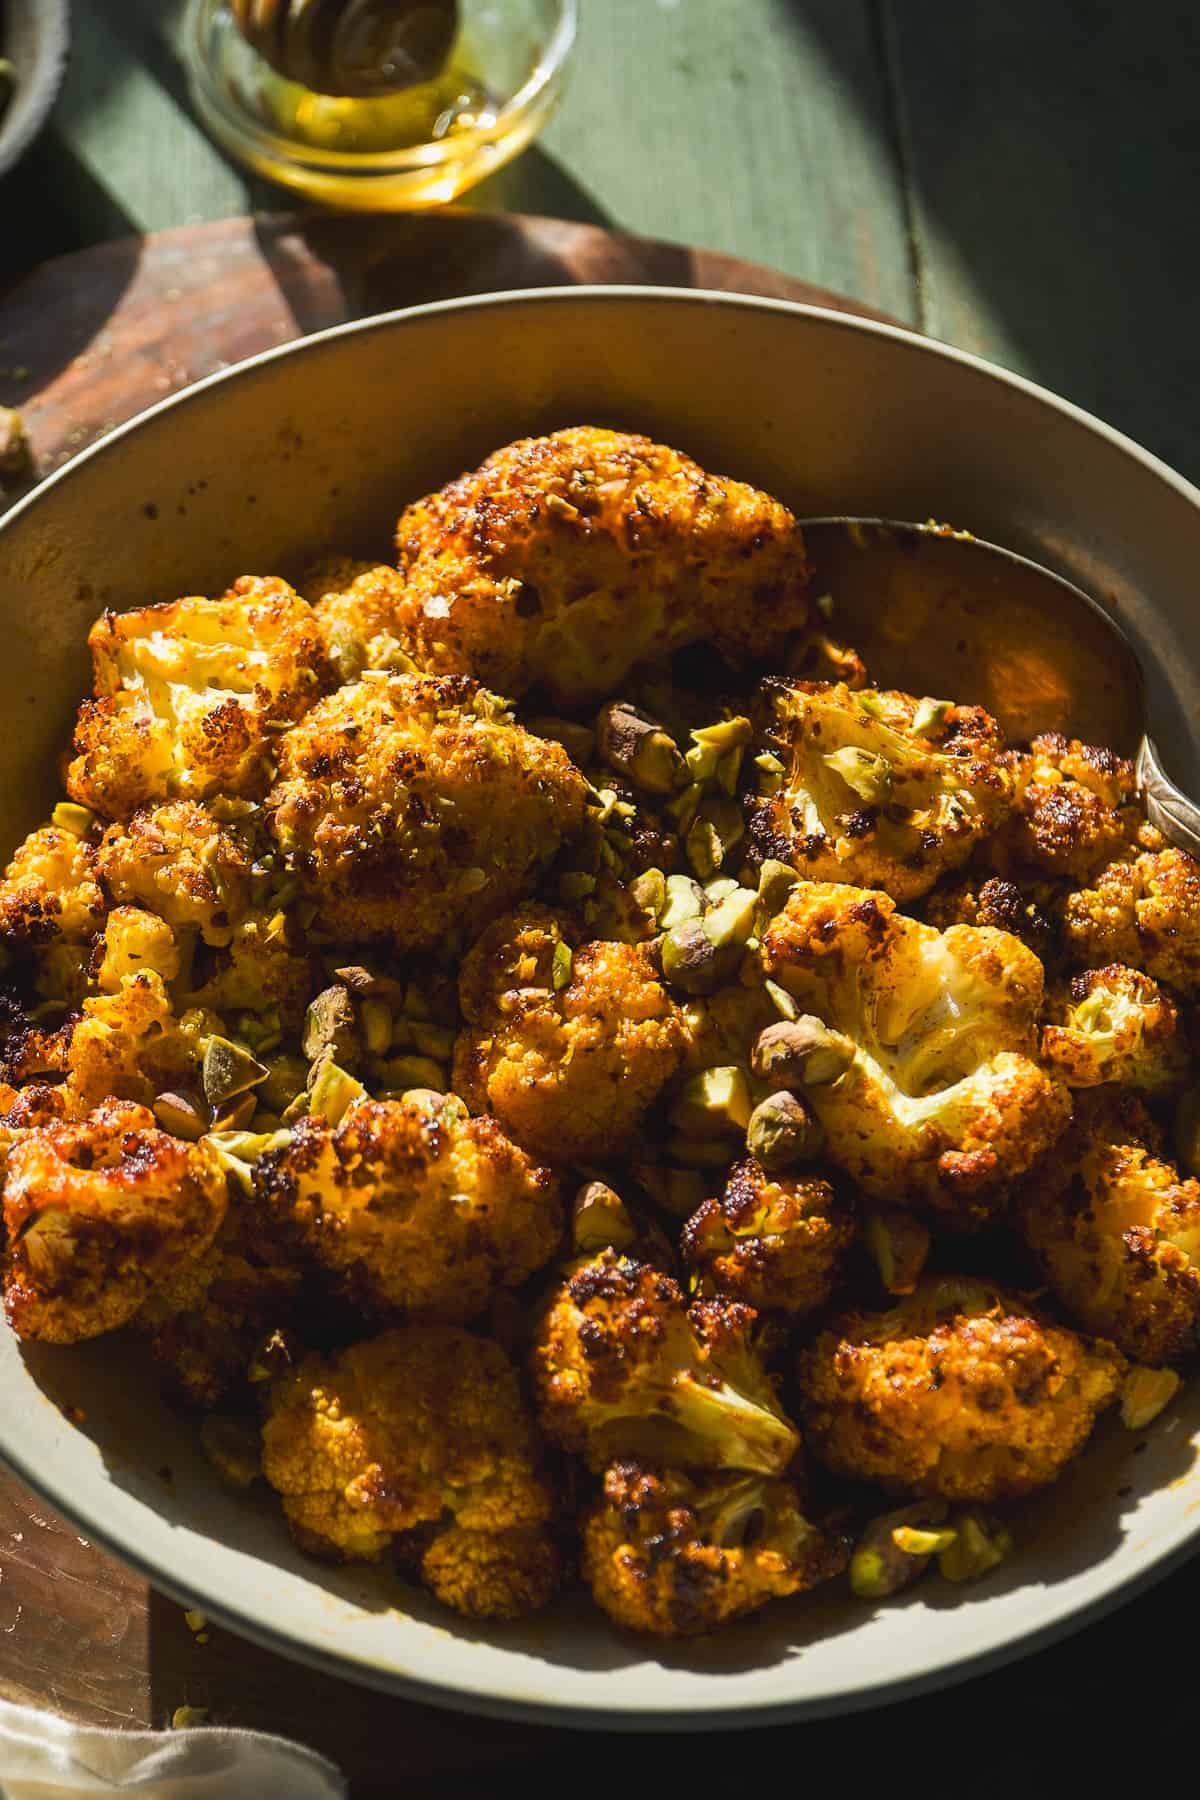 Bowl of air fry cauliflower florets seasoned with honey and pistachios.